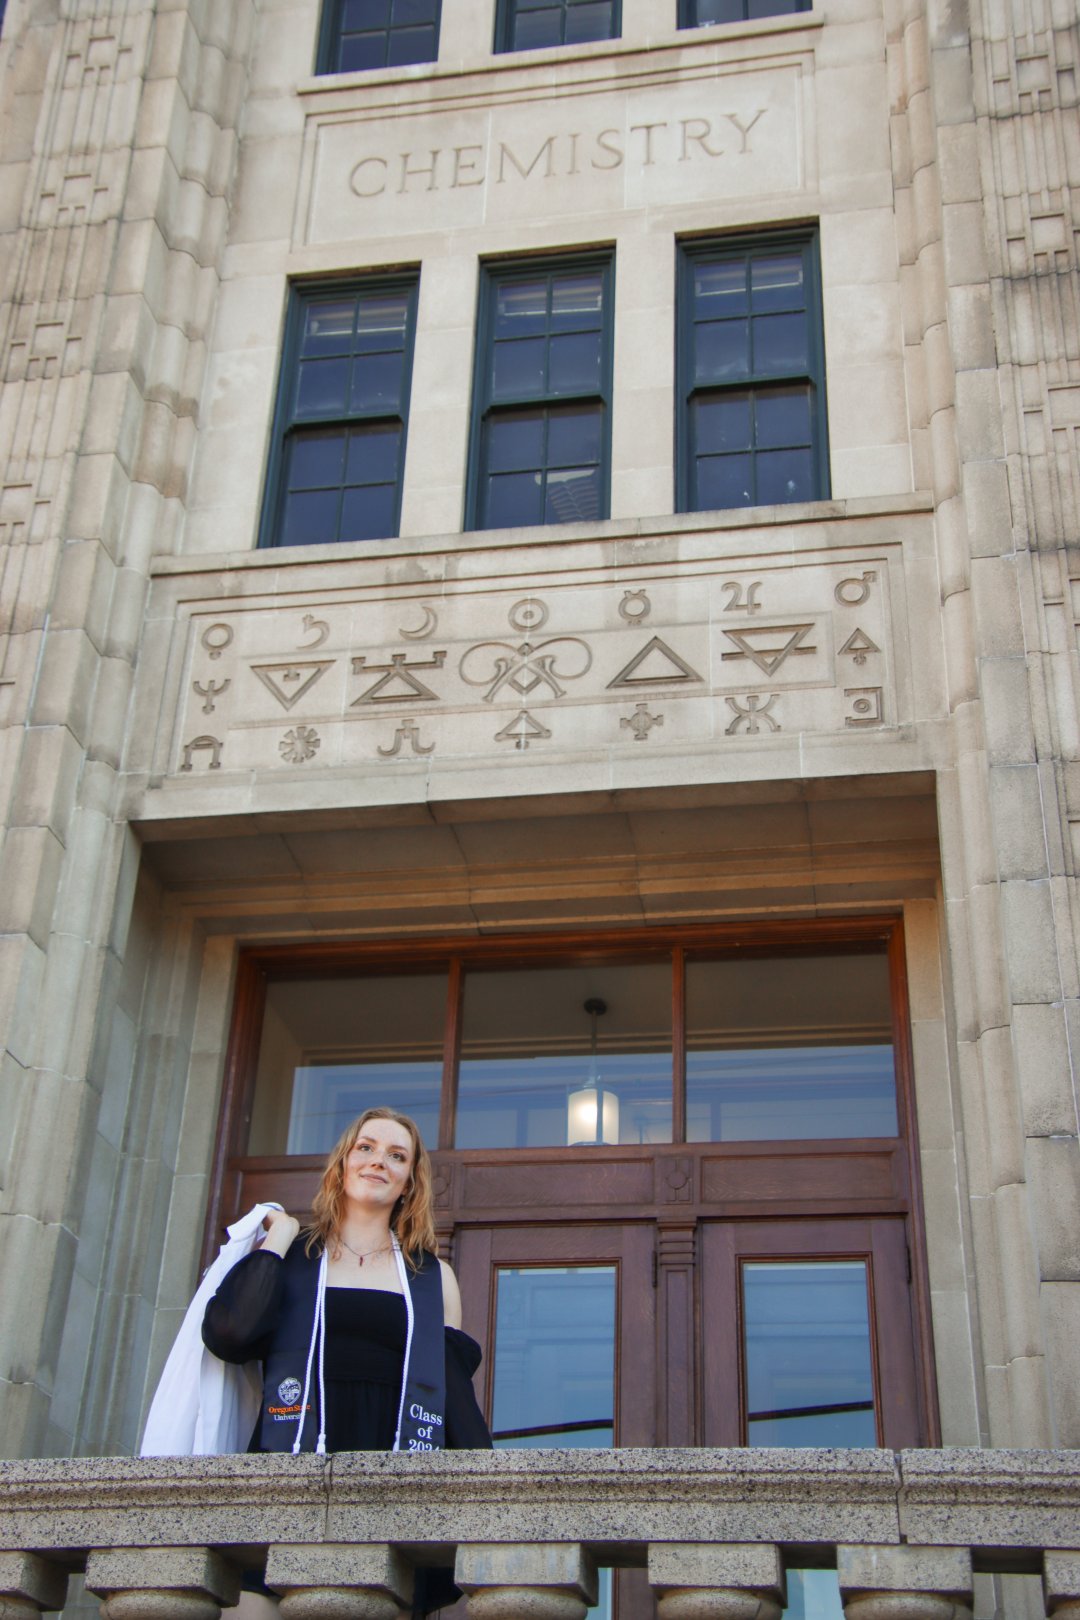 A woman stands on the Oregon State campus wearing a graduation outfit.